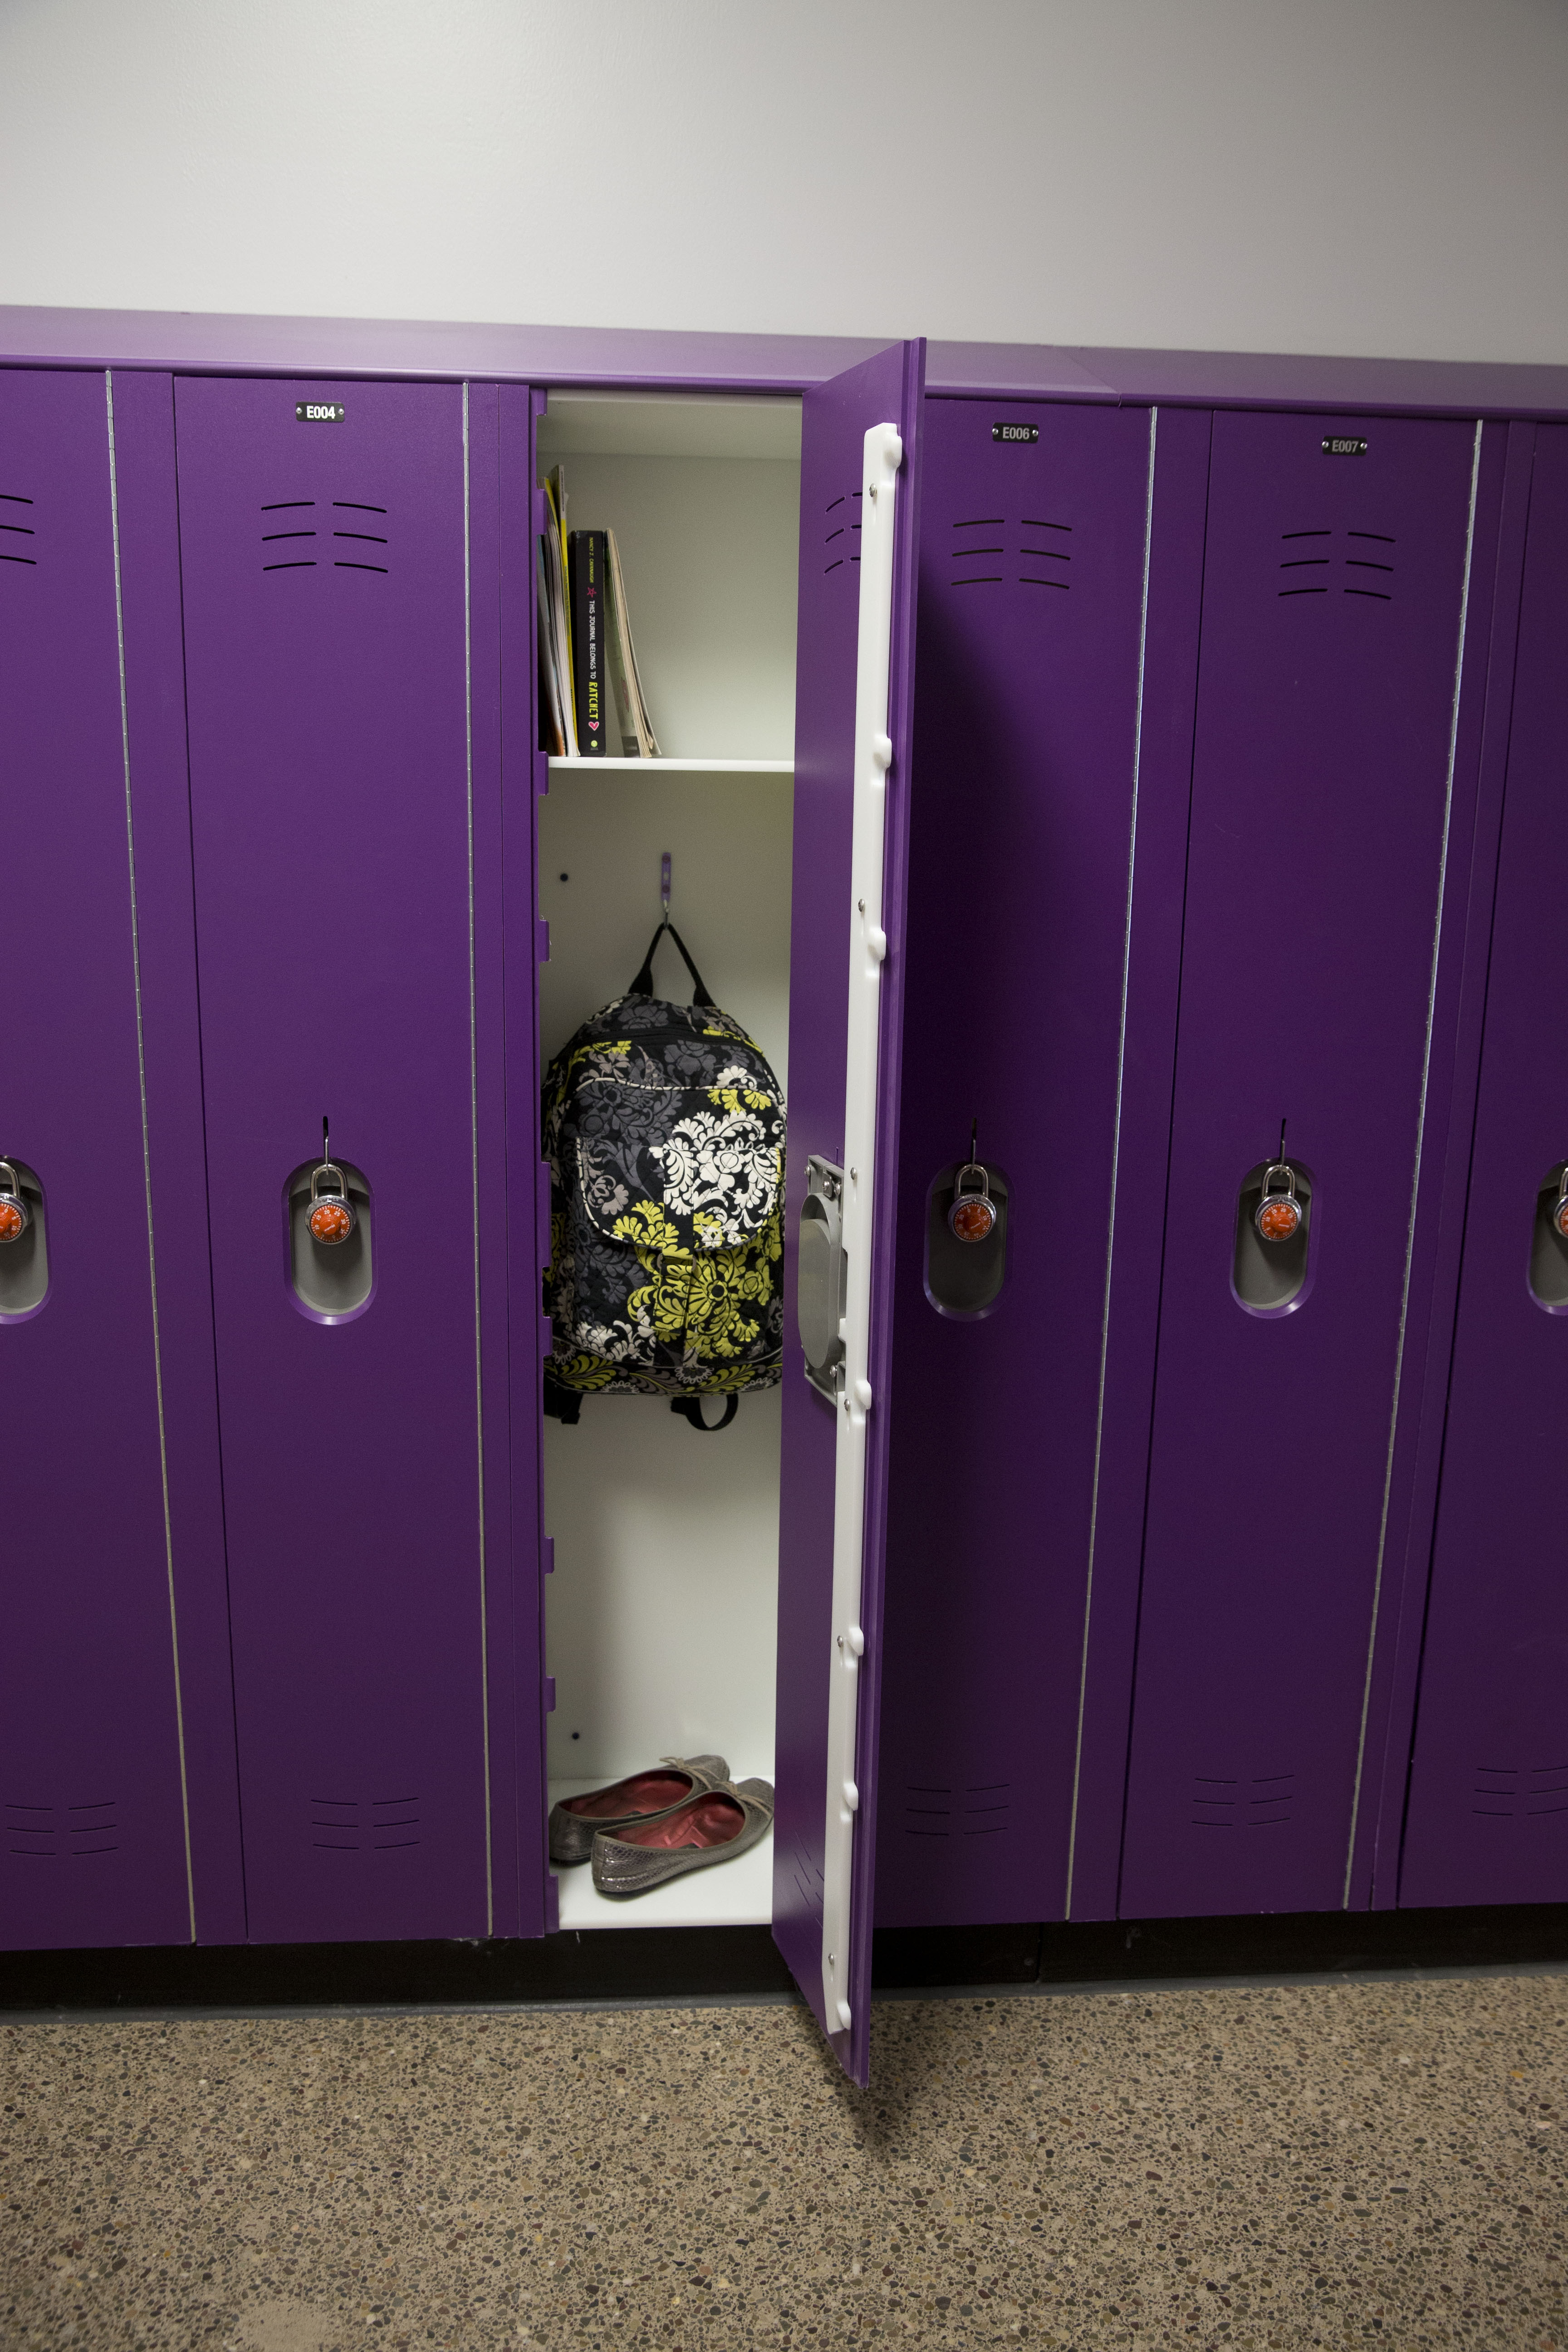 Danville is now ready to fight bacteria, graffiti and noise with new Duralife lockers.